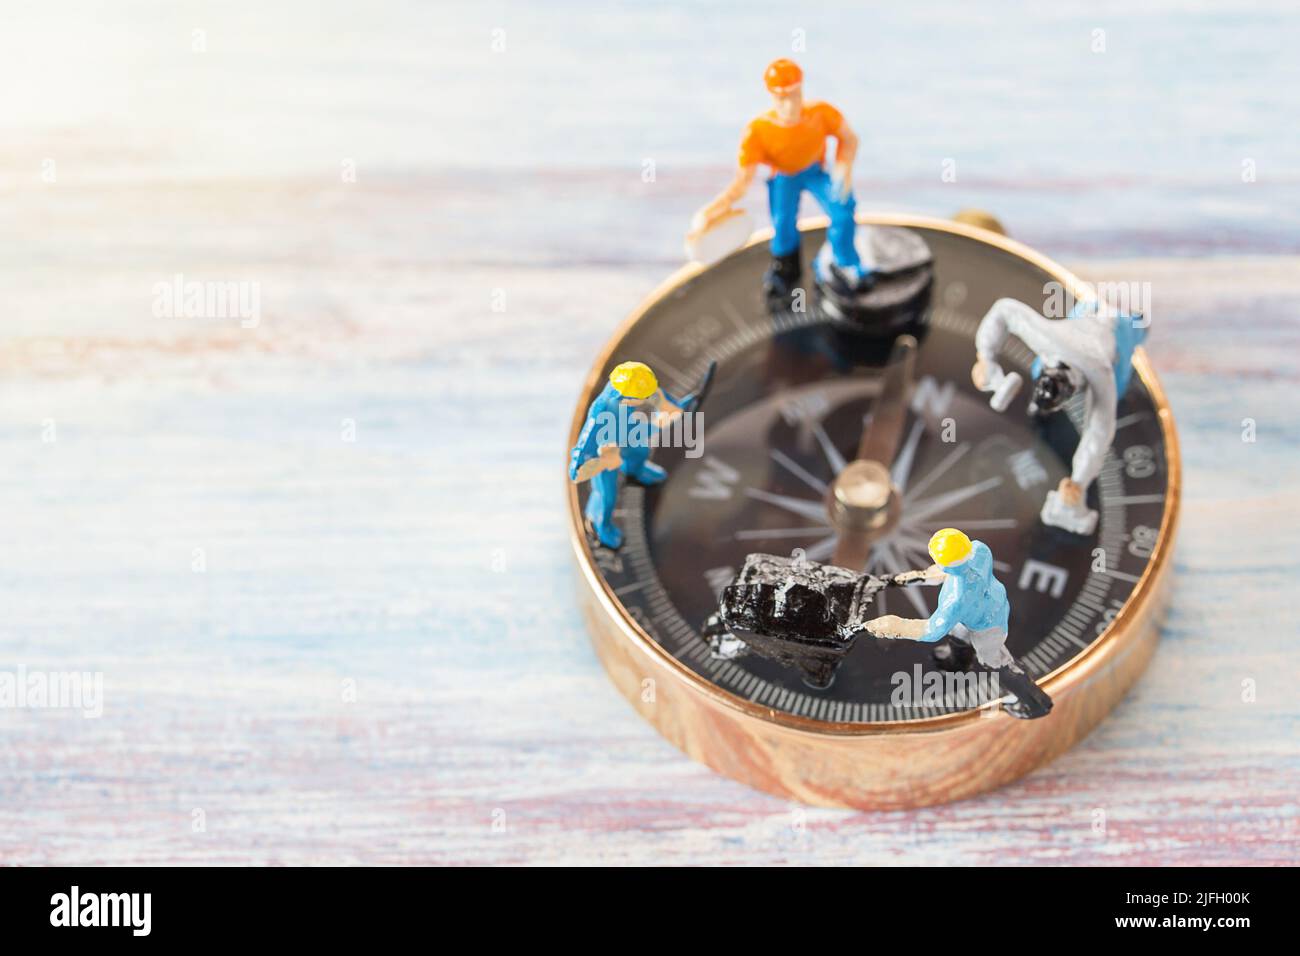 Miniature people- Figures construction worker, is working on a compass area with blurred background and sunlight.Business and construction concept Stock Photo